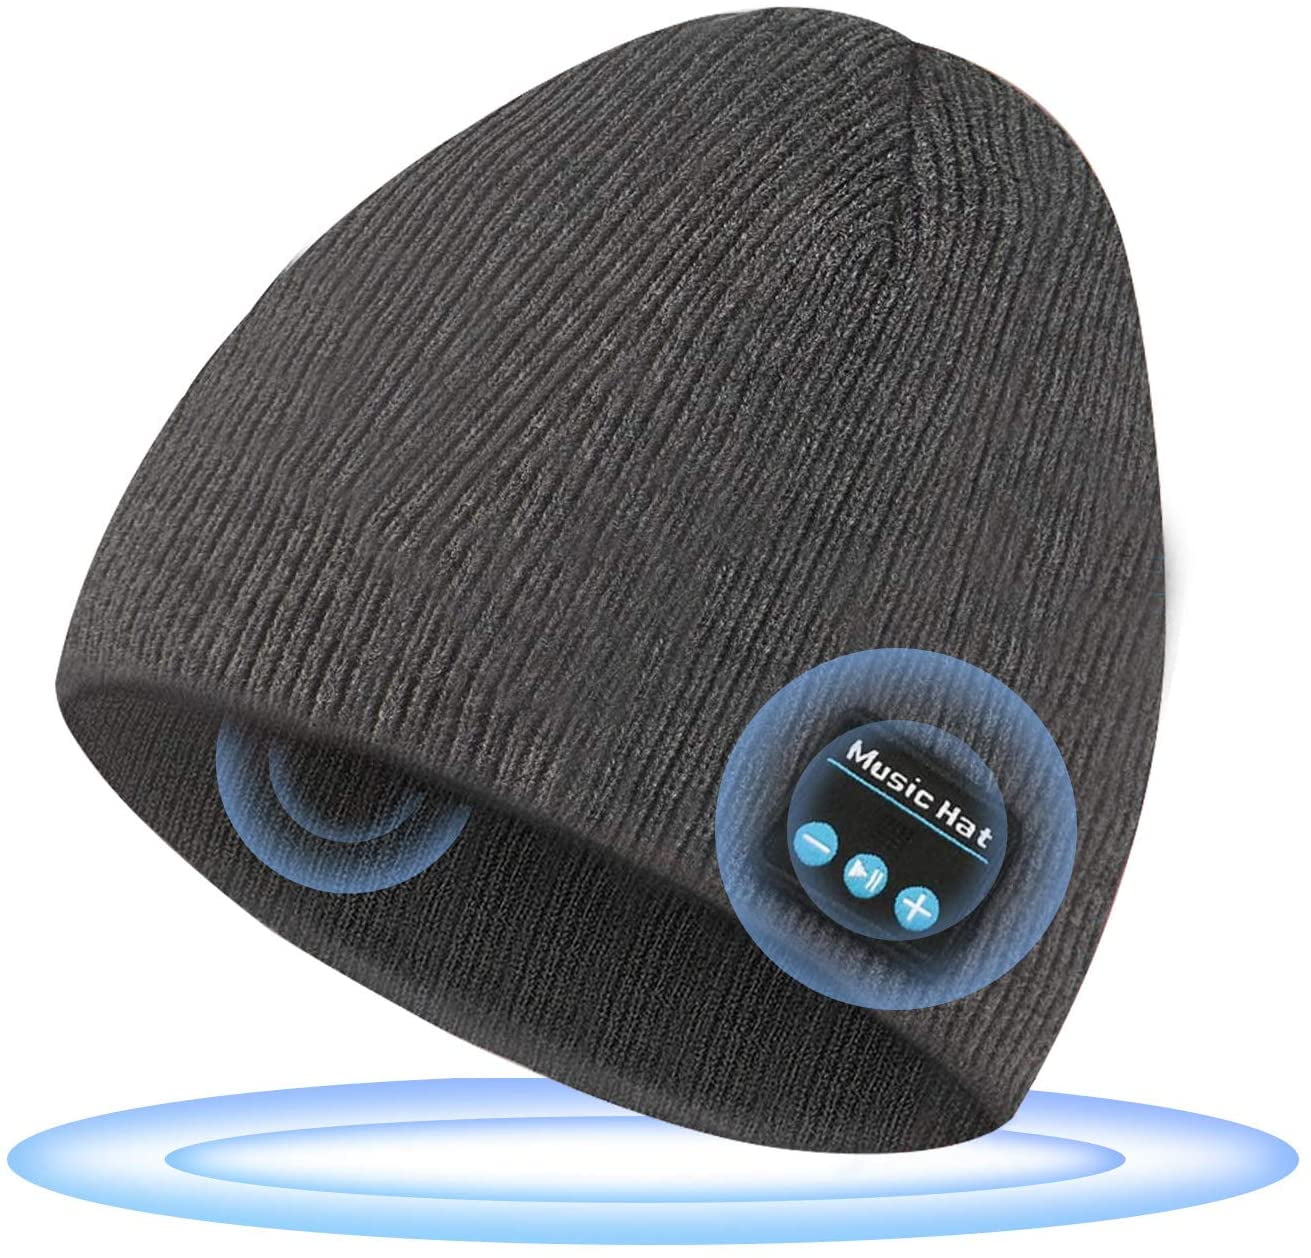 Unisex Music Beanie for Outdoor Sports Gifts Christmas Birthday Bluetooth Beanie Hat Music Hats with Built-in Microphone,Winter Hat Built-in Detachable HD Stereo Speakers & Microphone 